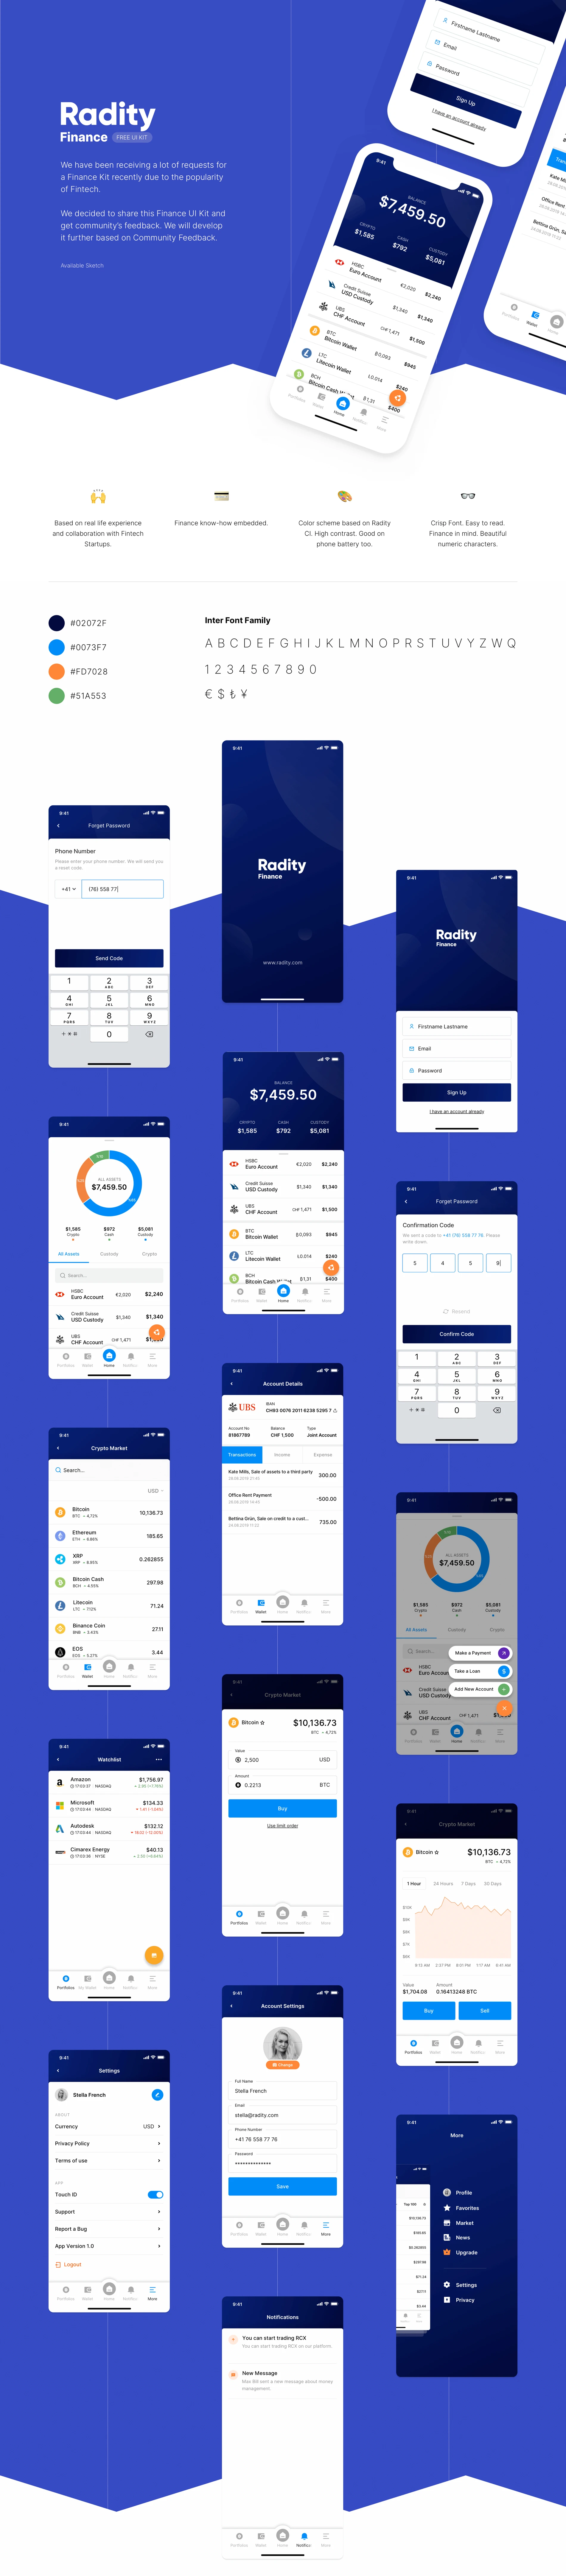 Radity - Finance UI Kit - We have been receiving a lot of requests for a Finance Kit recently due to the popularity of Fintech. We decided to share this Finance UI Kit and get community’s feedback.